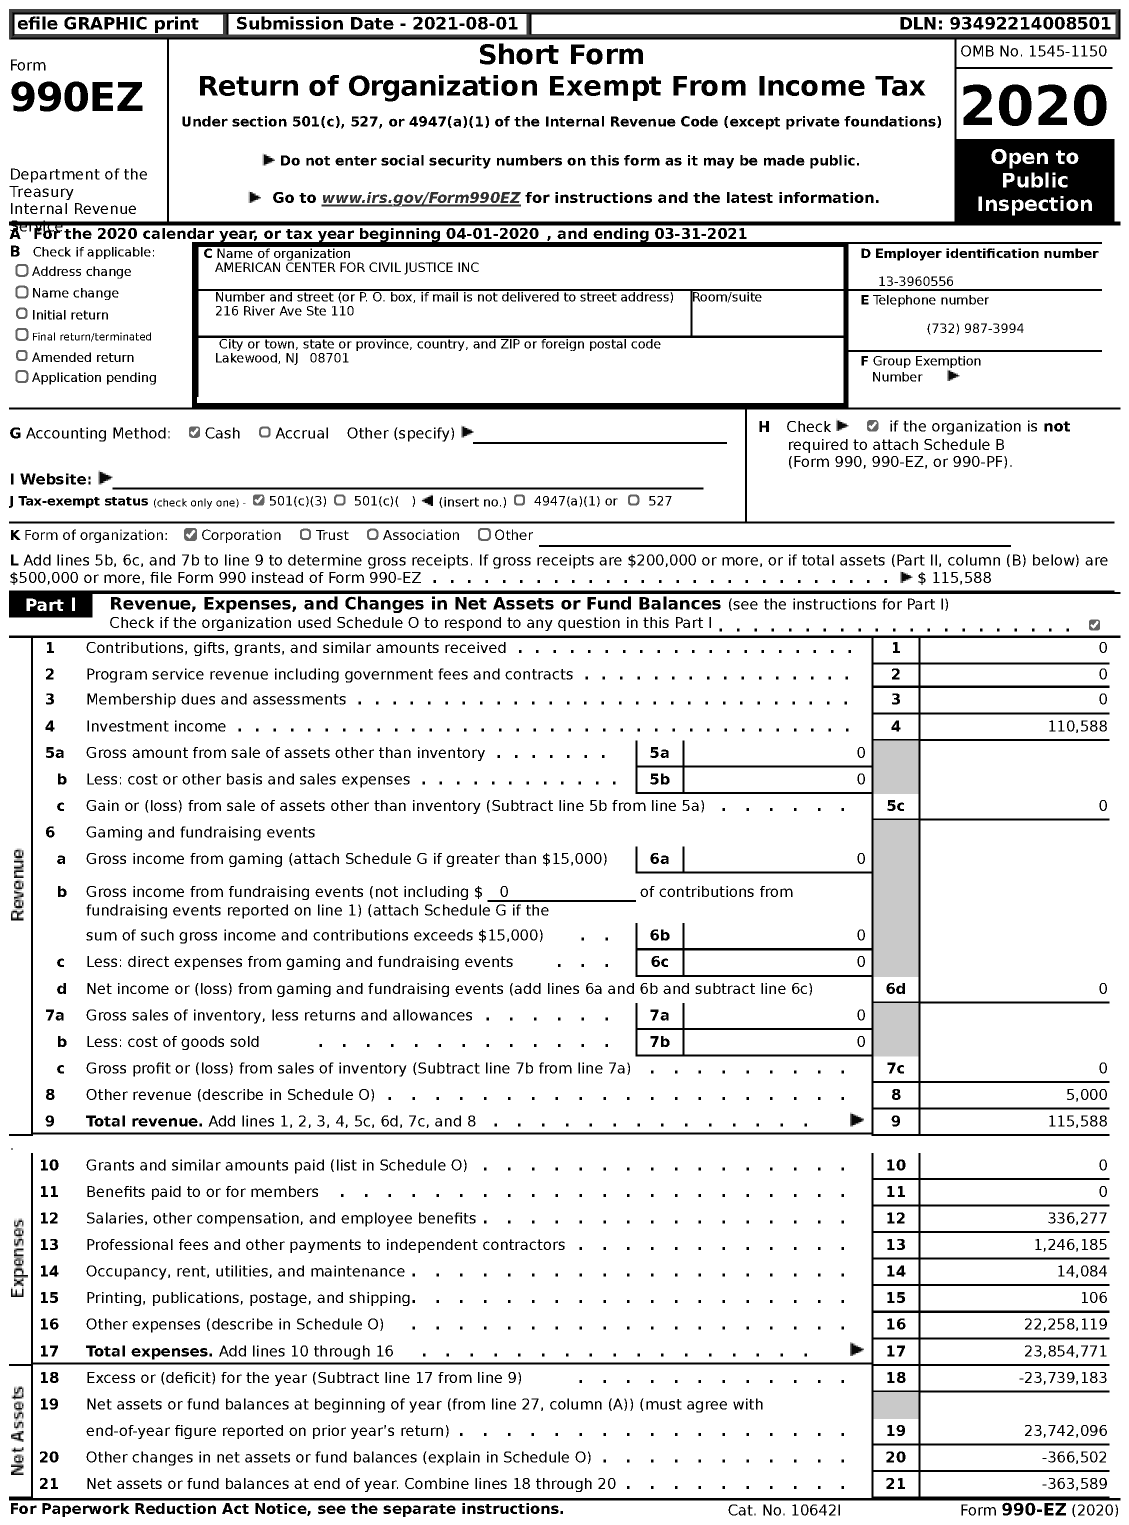 Image of first page of 2020 Form 990EZ for American Center for Civil Justice